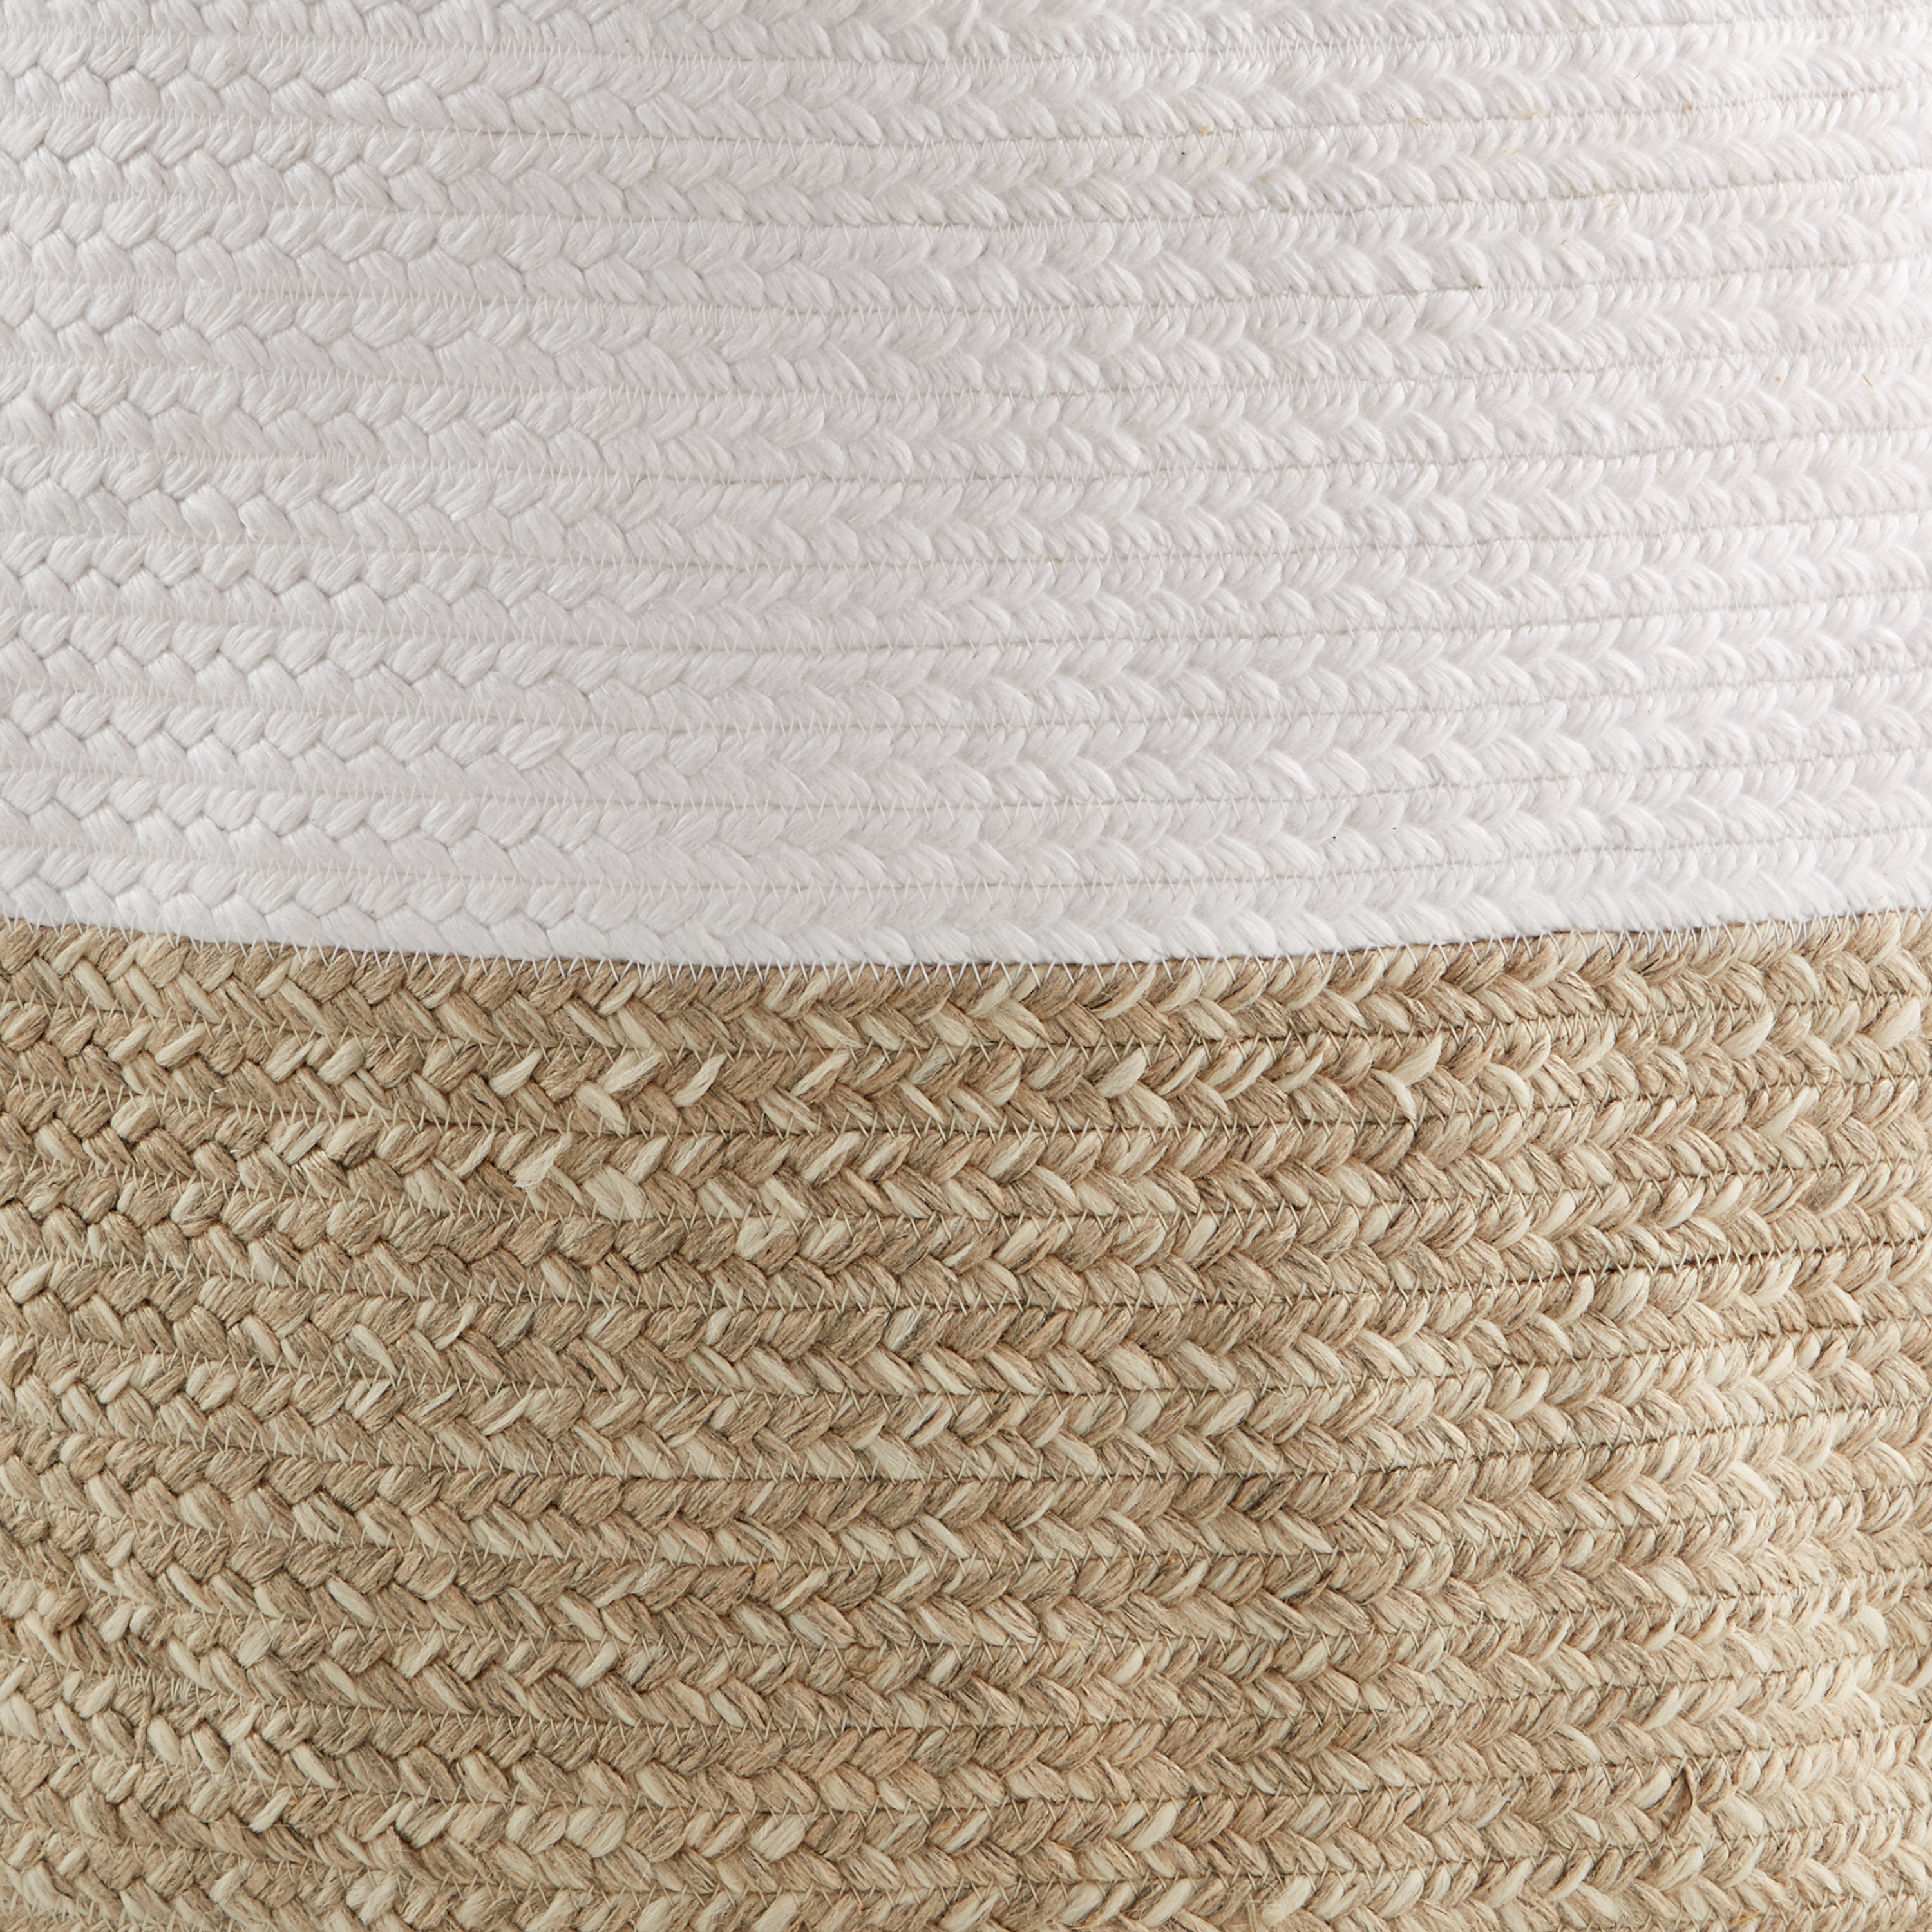 D&JM Brown and Ivory Round Outdoor Pouf Ottoman - image 3 of 9